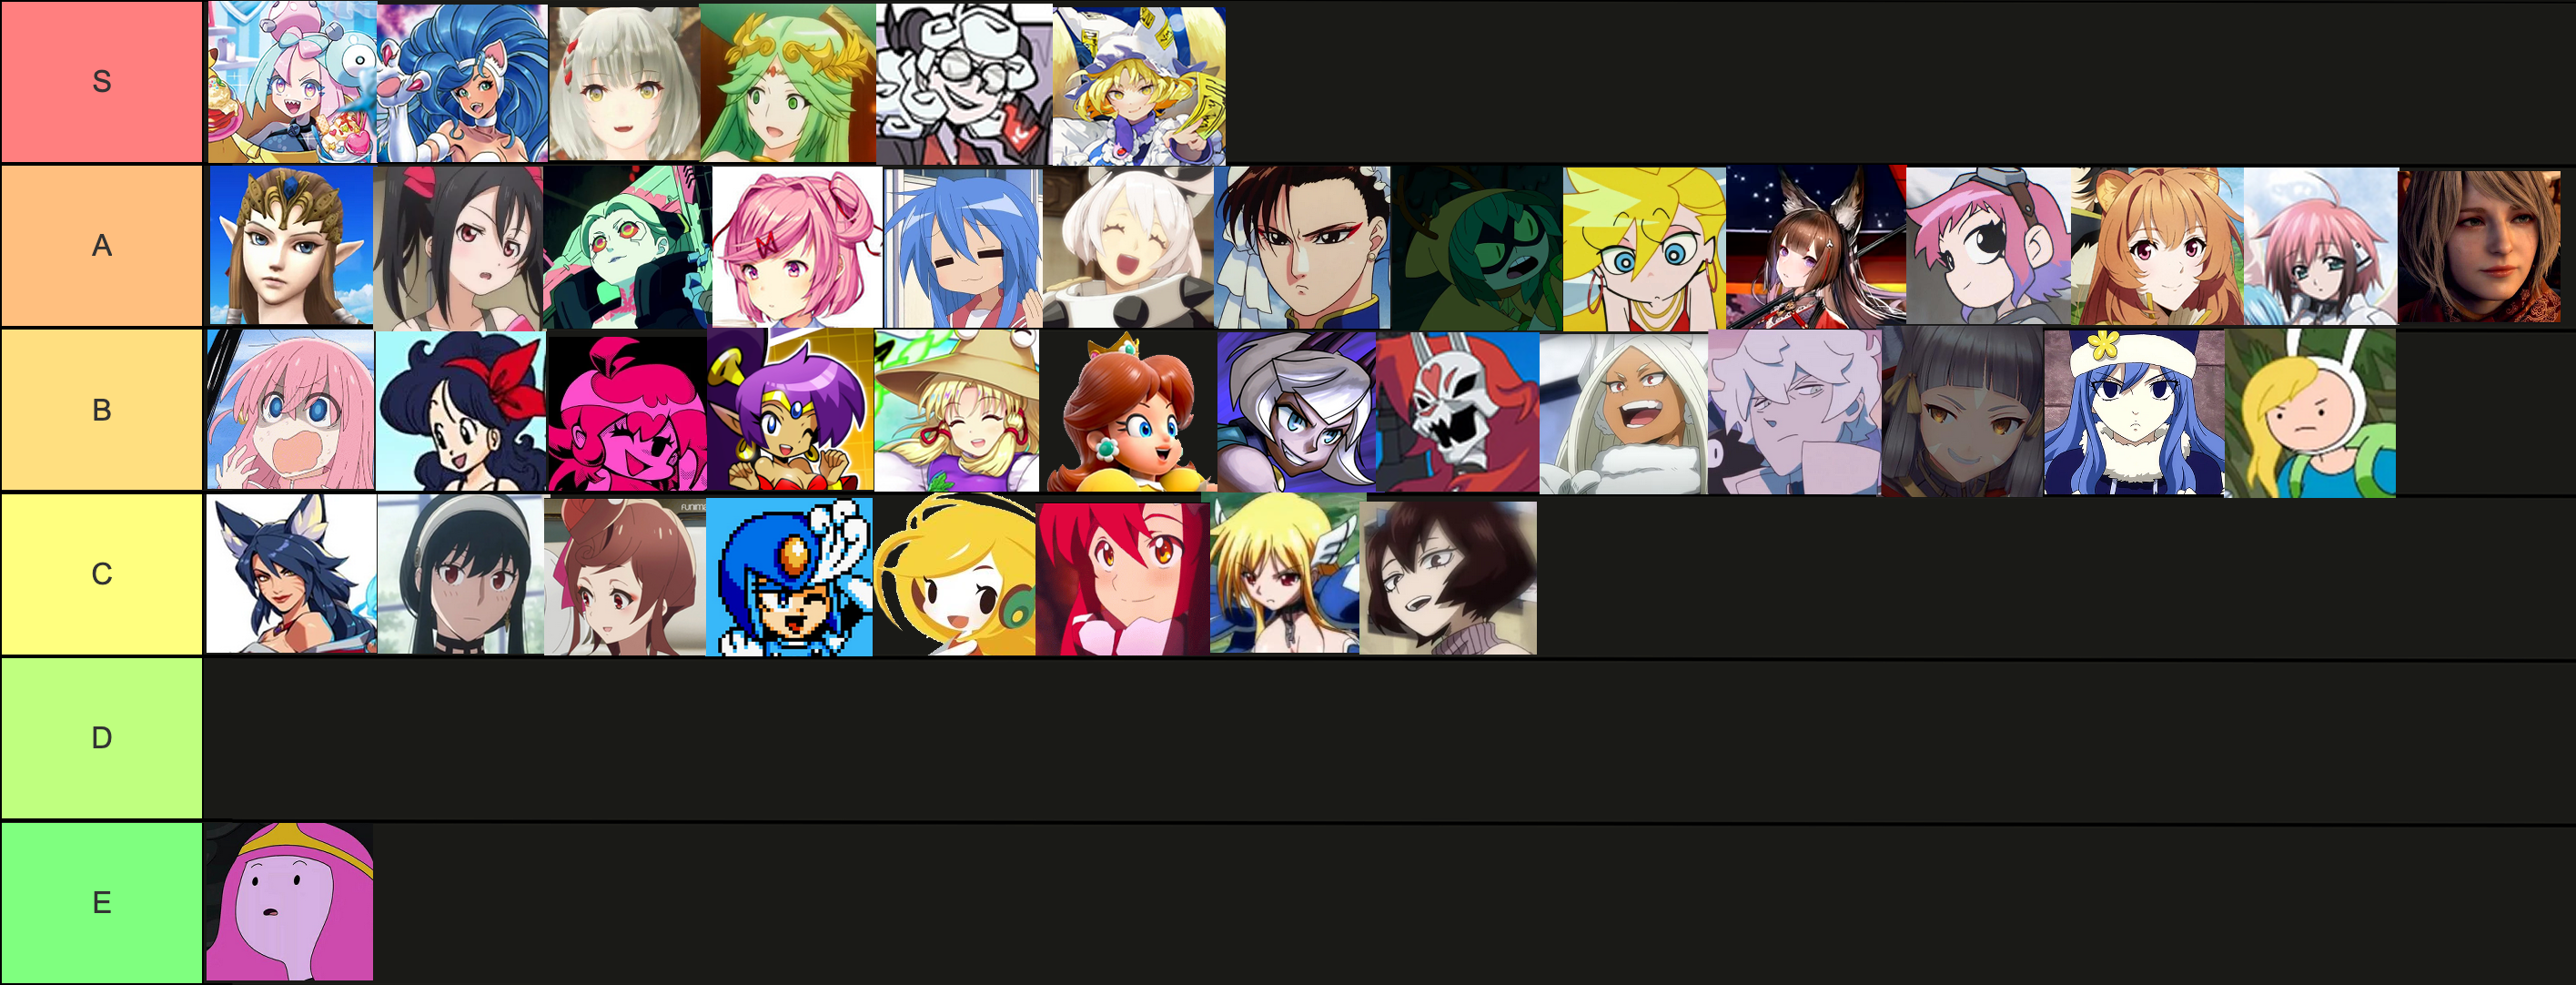 My Anime Tier List by SlickVideoProduction on DeviantArt